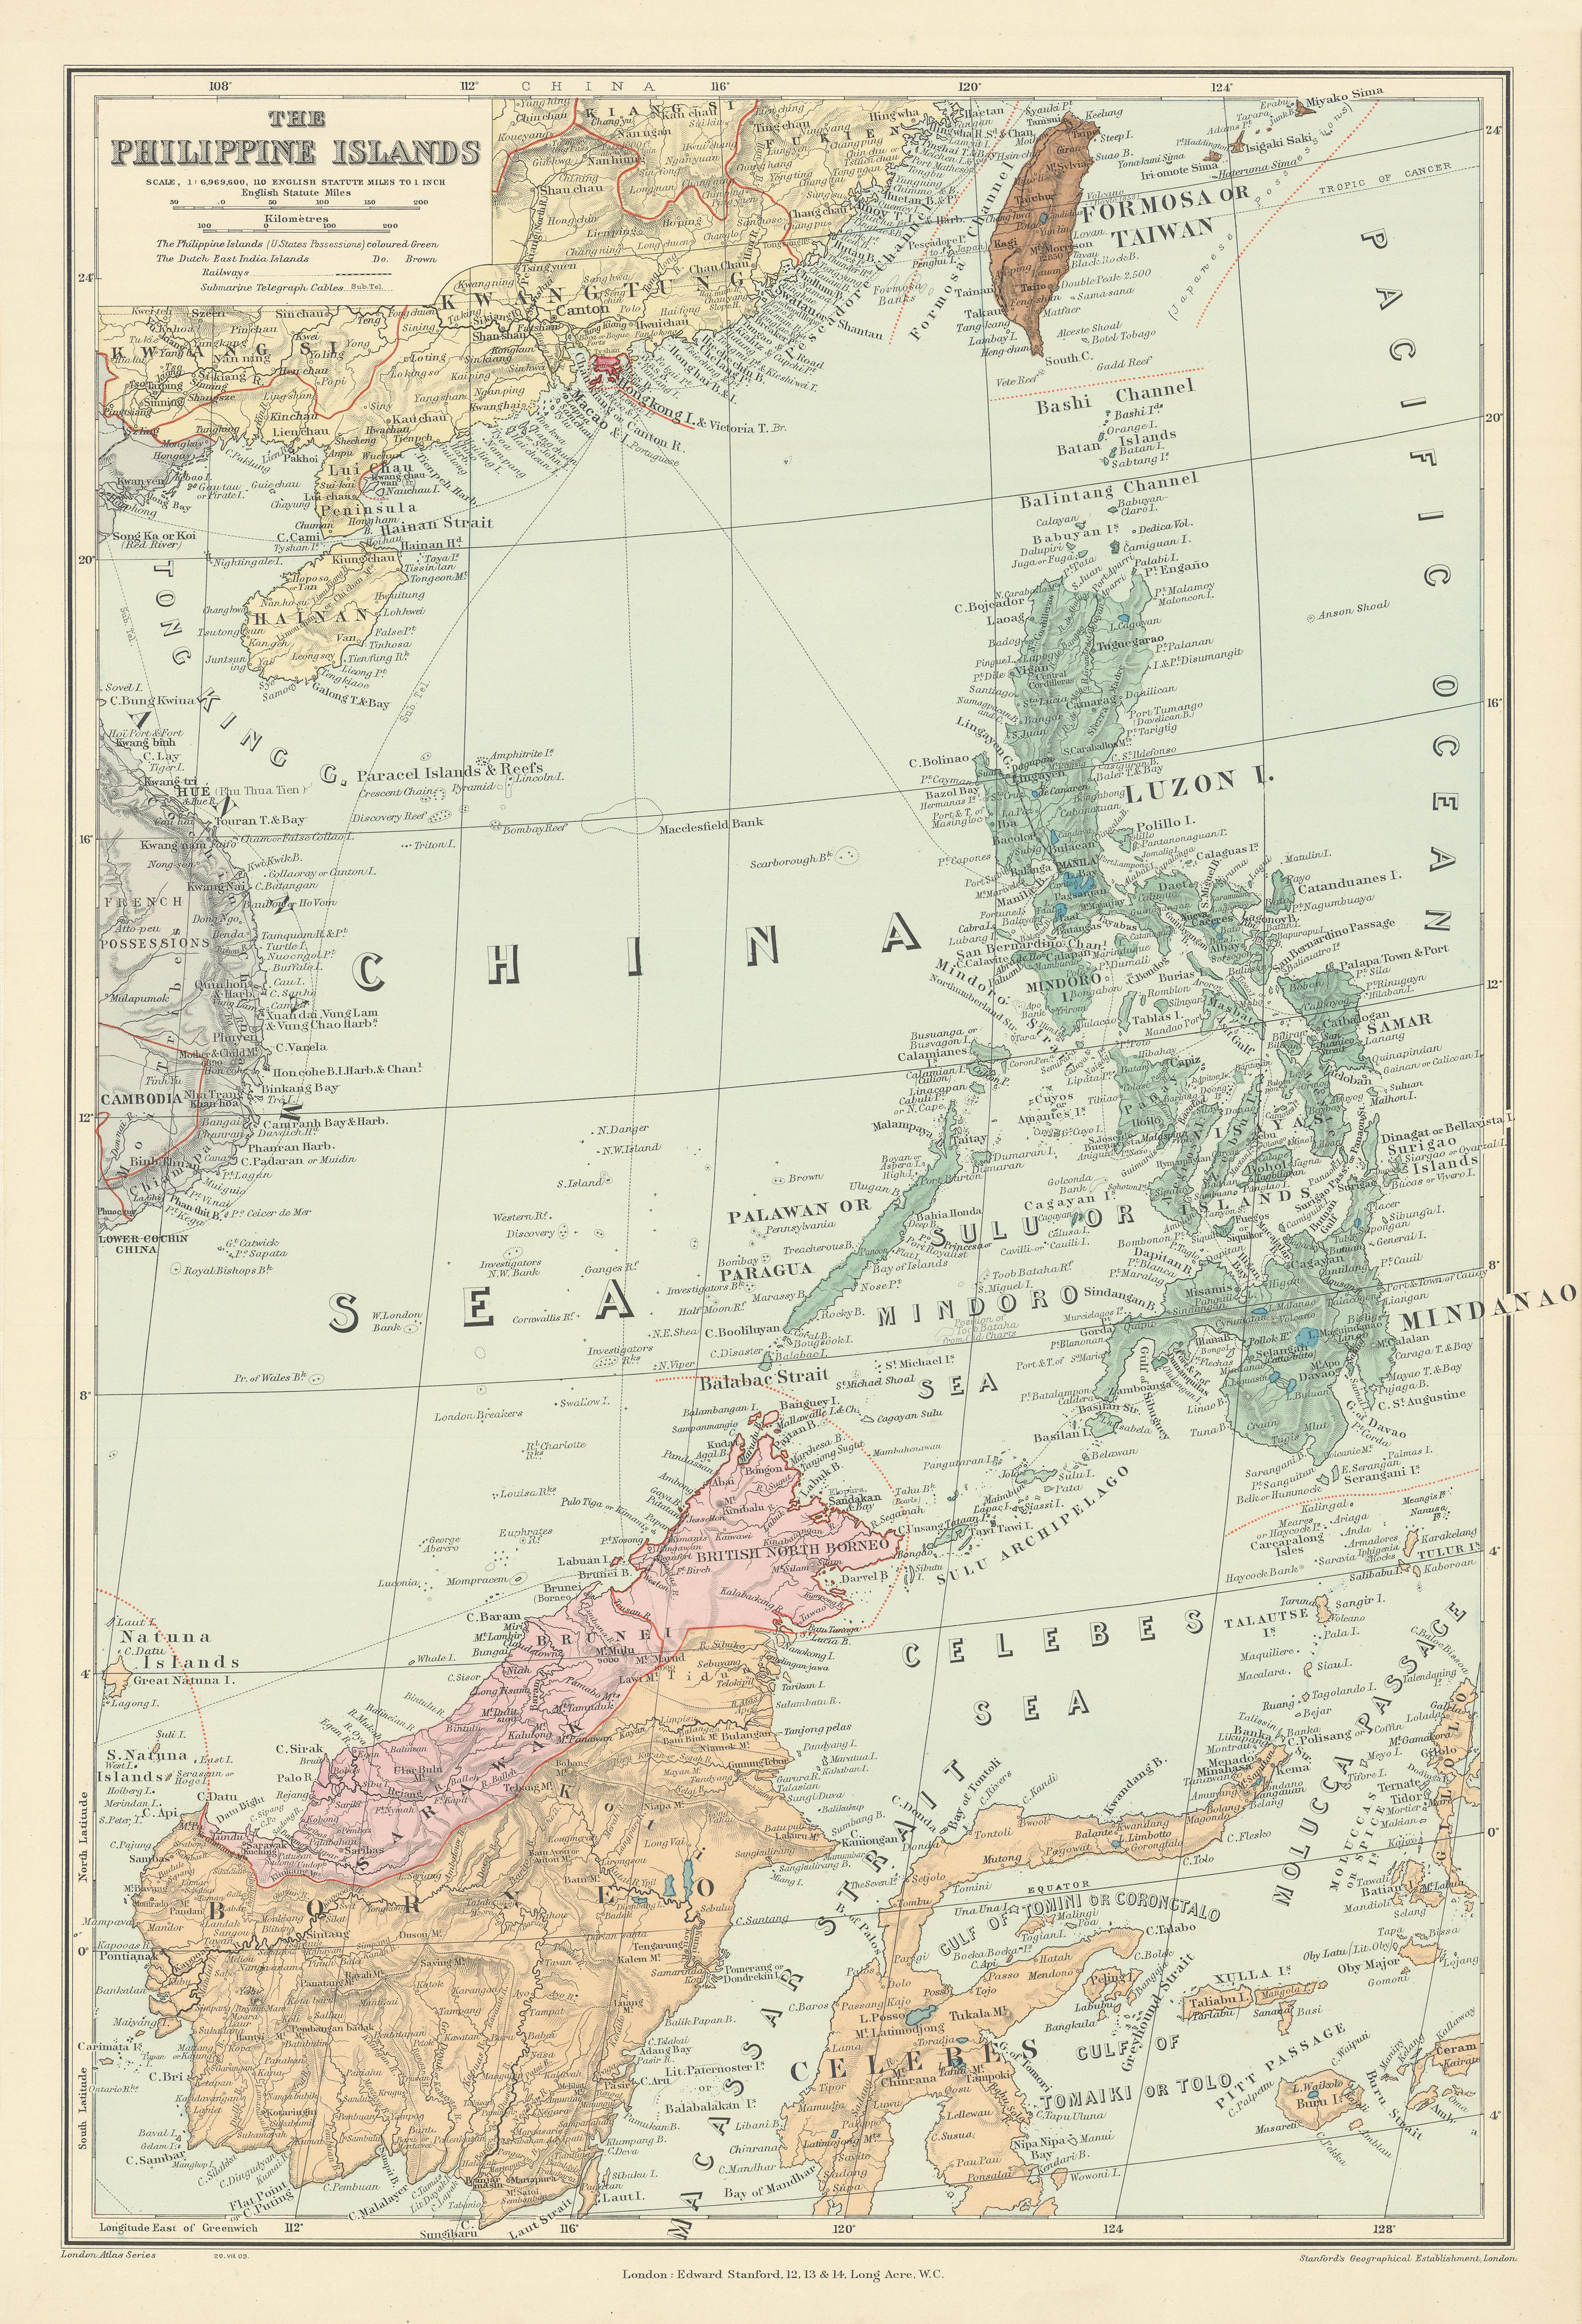 Associate Product Philippine Islands. Borneo Celebes Sulawesi Kalimantan. STANFORD 1904 old map